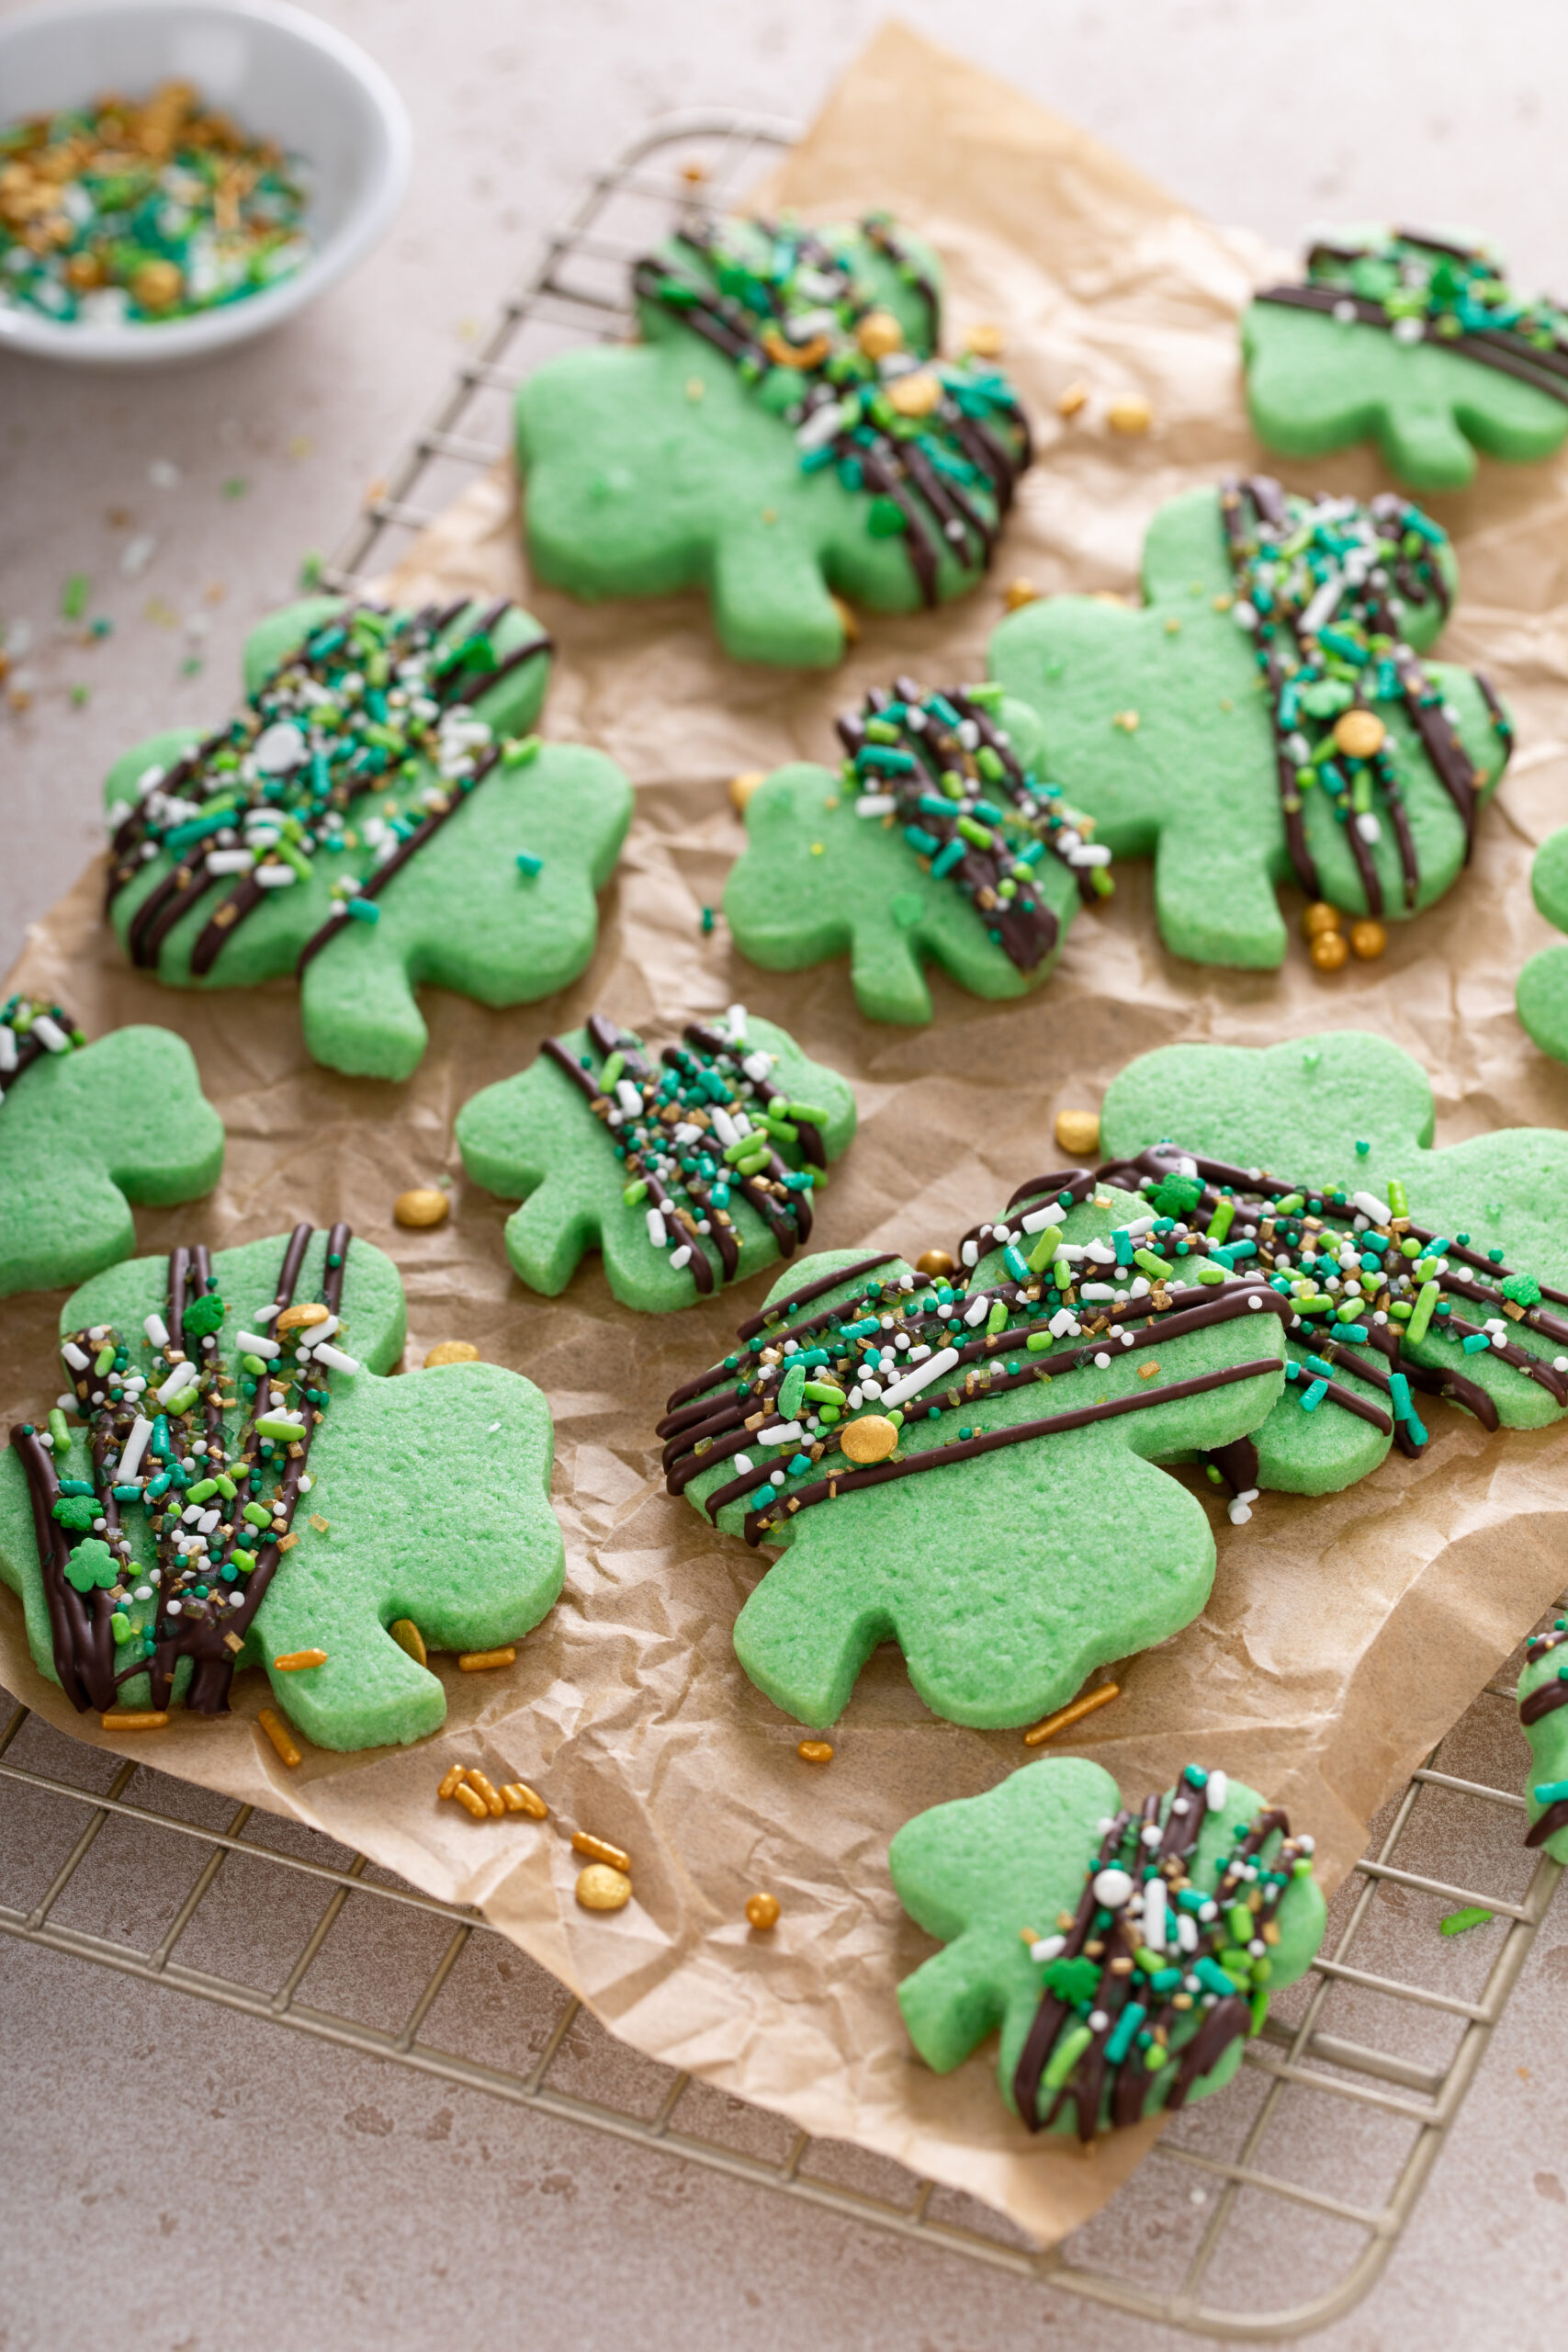 Shamrock cookies with chocolate glaze and sprinkles for St Patricks day - Top 10 St. Patrick's Day Dessert Recipes; St. Patrick's day recipes for desserts along with other green recipes for this Irish holiday!